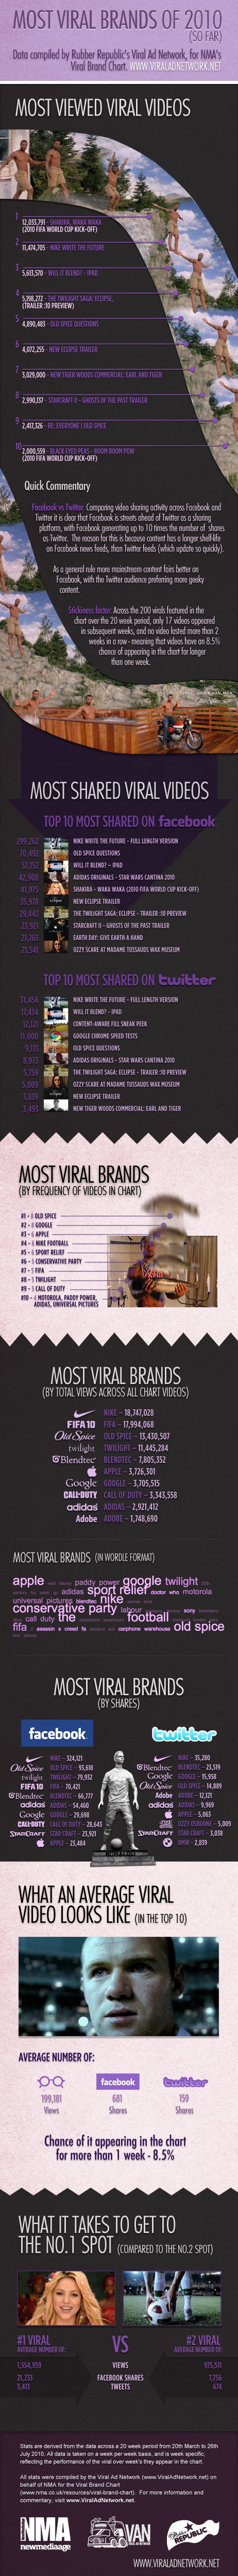 the best viral brands of 2010